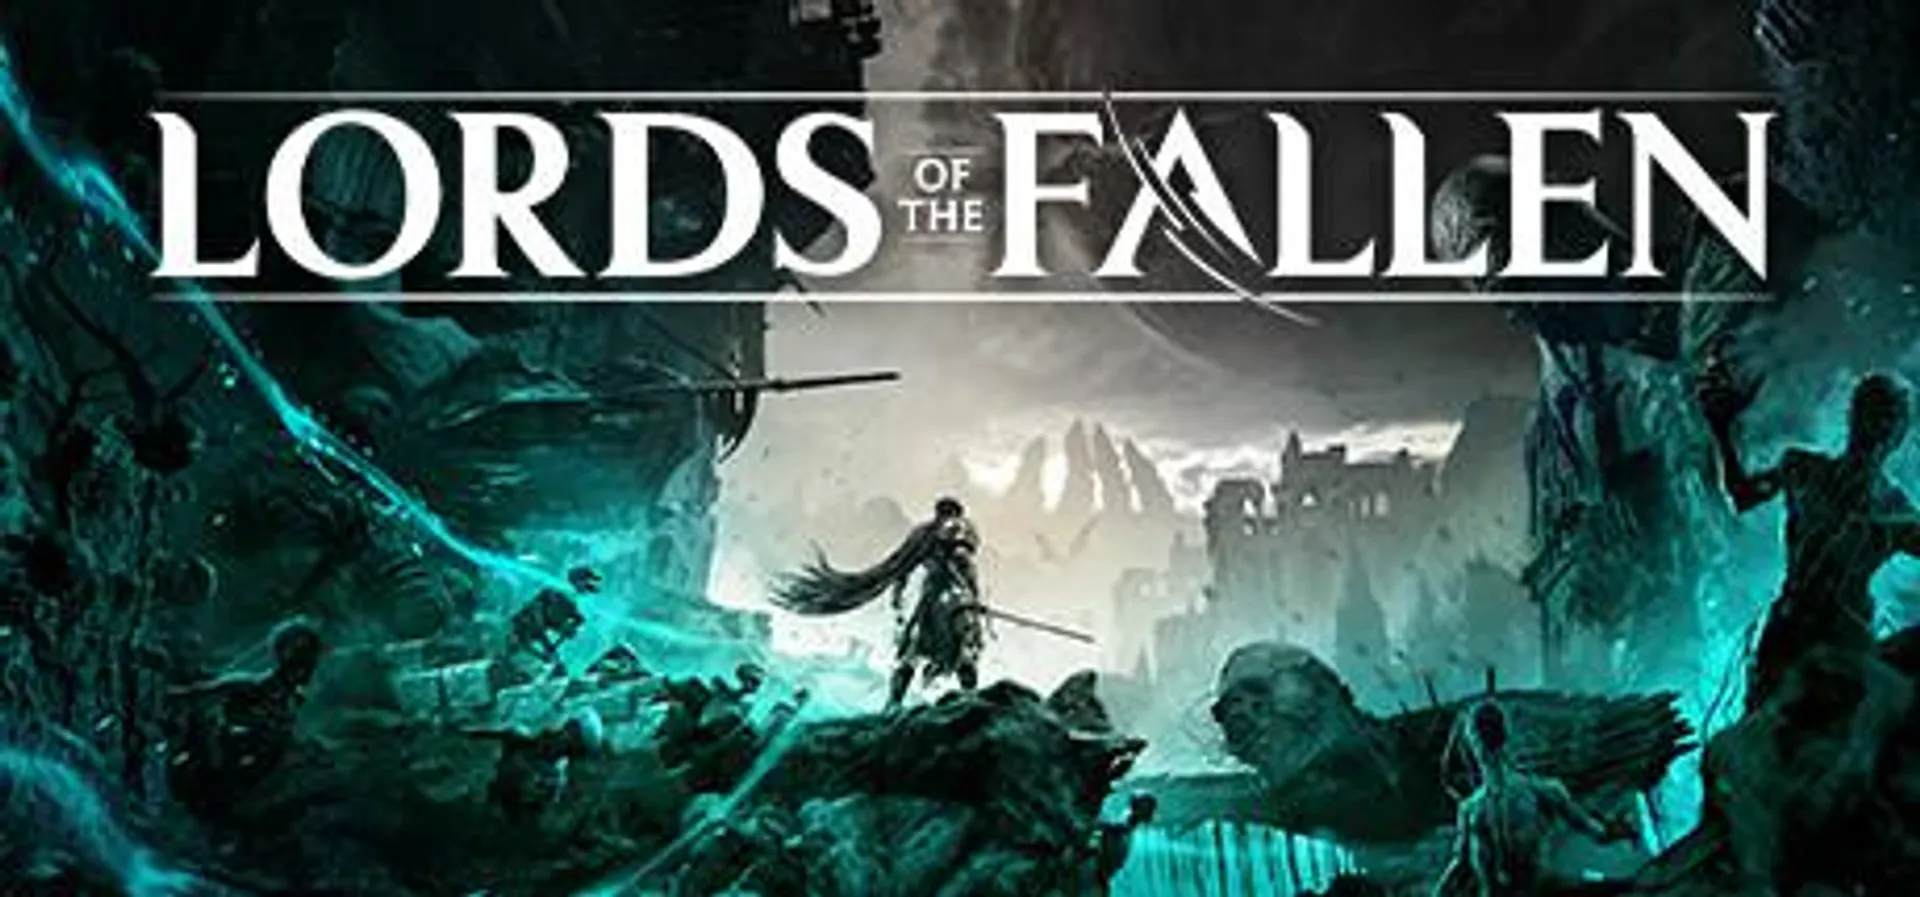 Save 35% on Lords of the Fallen on Steam